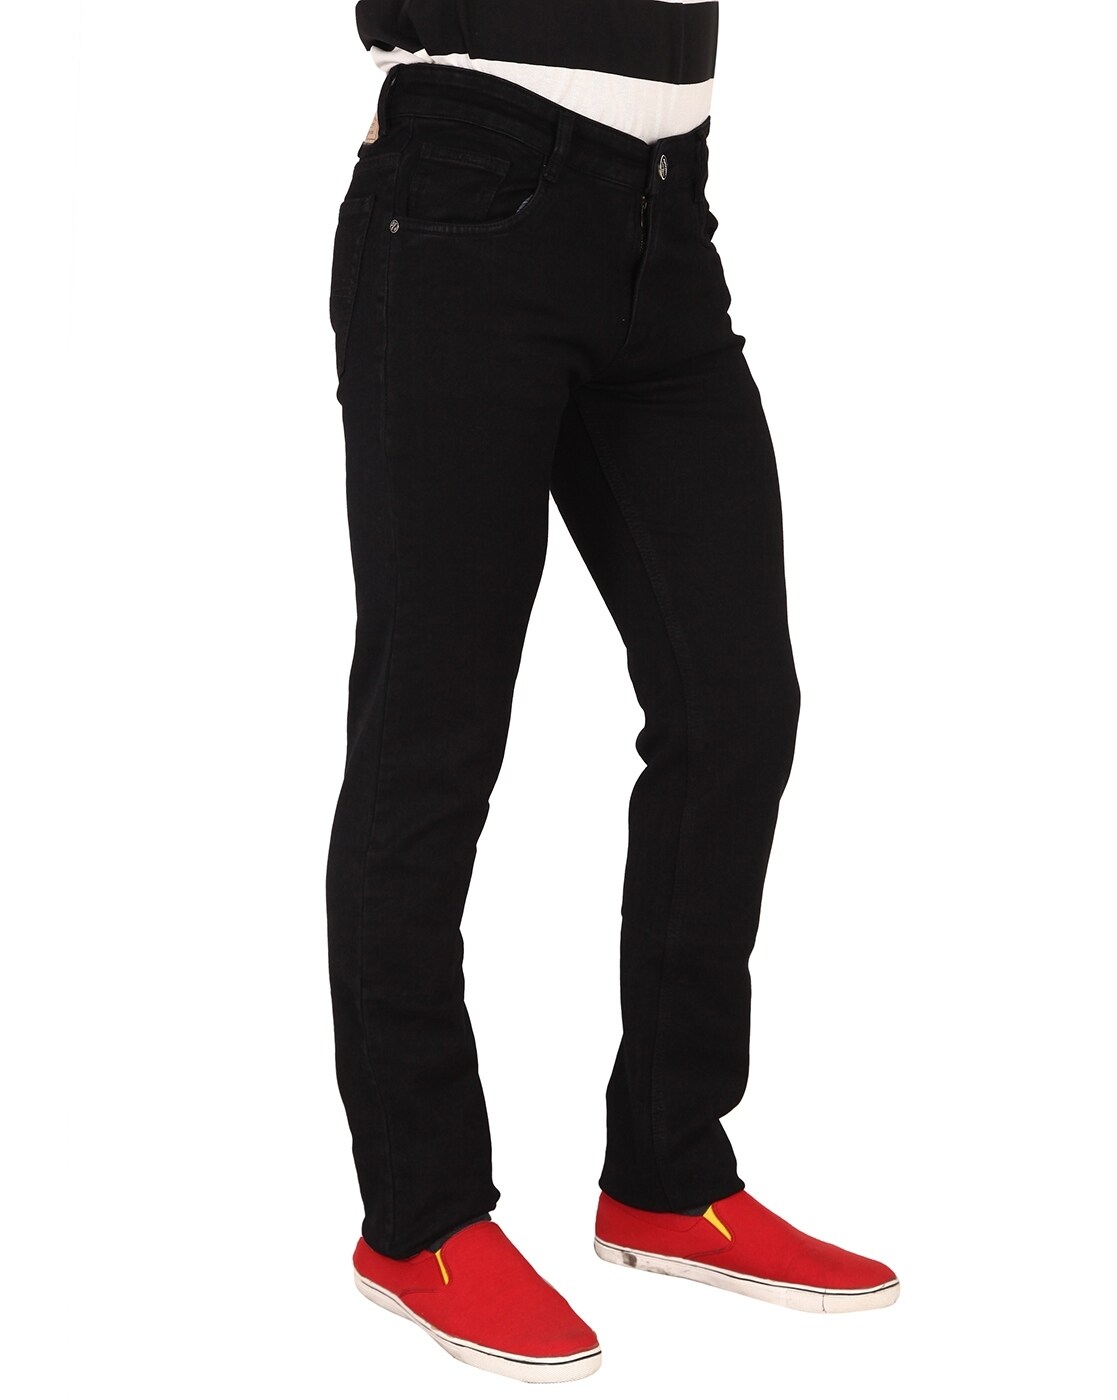 Buy your Lee 101 Z Jeans - Black@ Union Clothing | Union Clothing